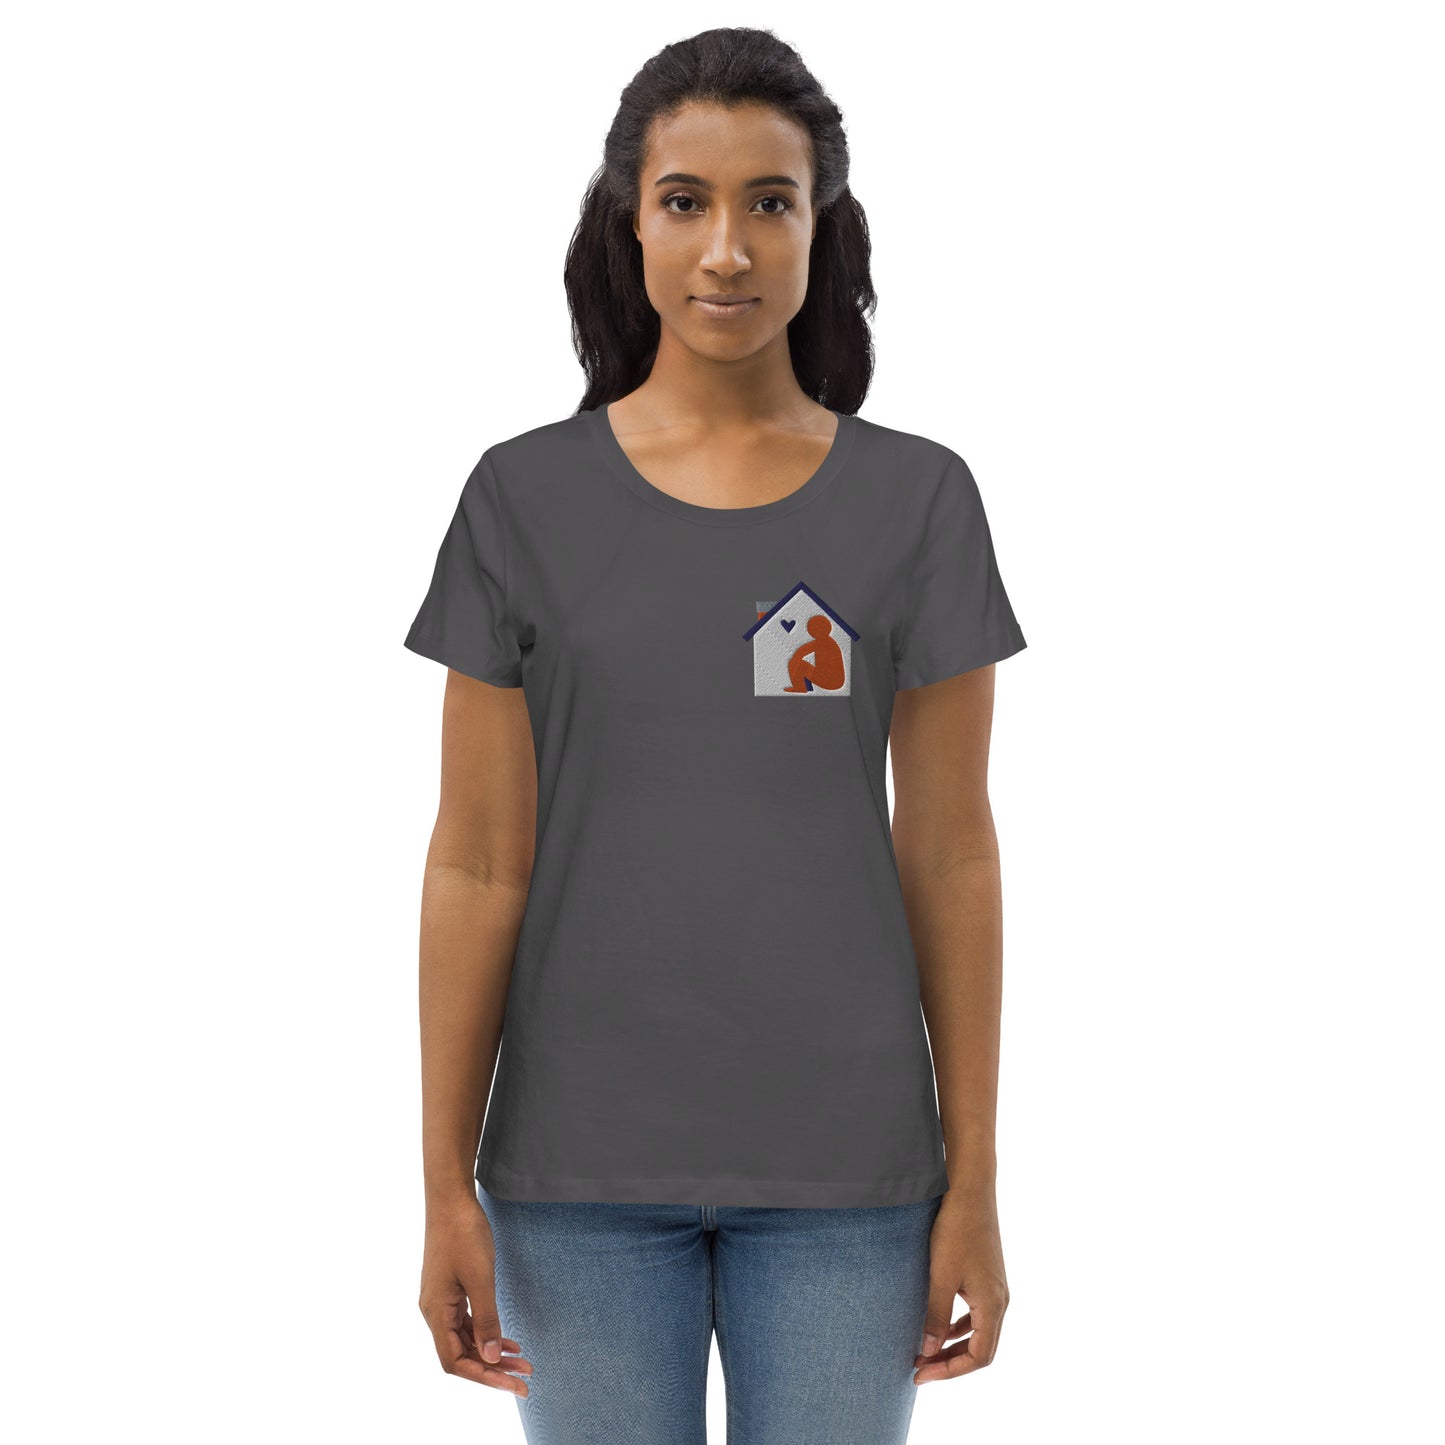 Housing is a Human Right - Women's fitted eco tee